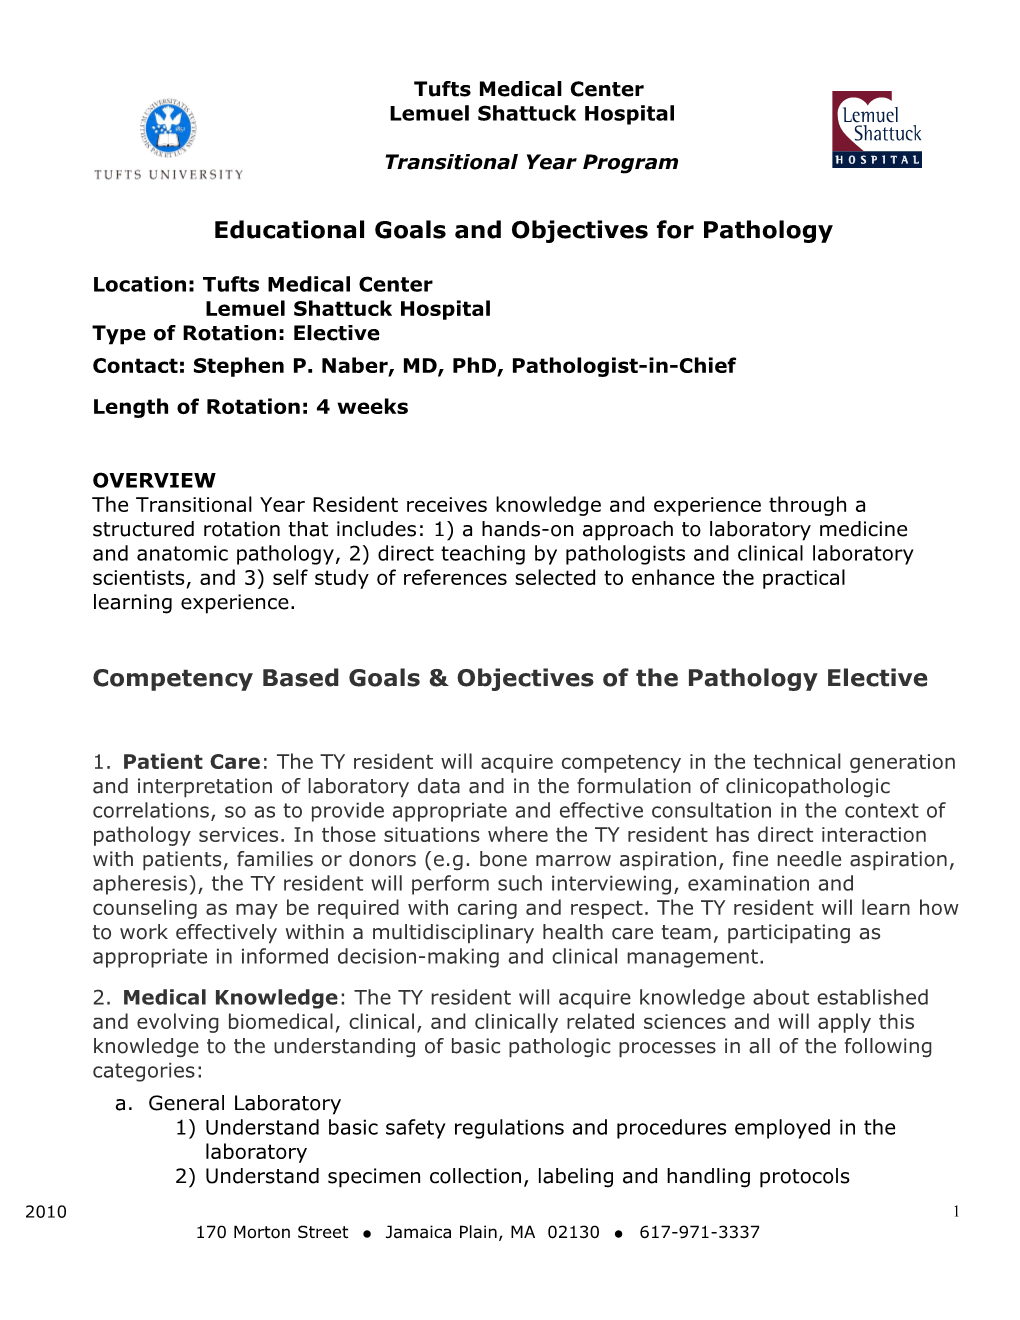 Educational Goals and Objectives for Pathology